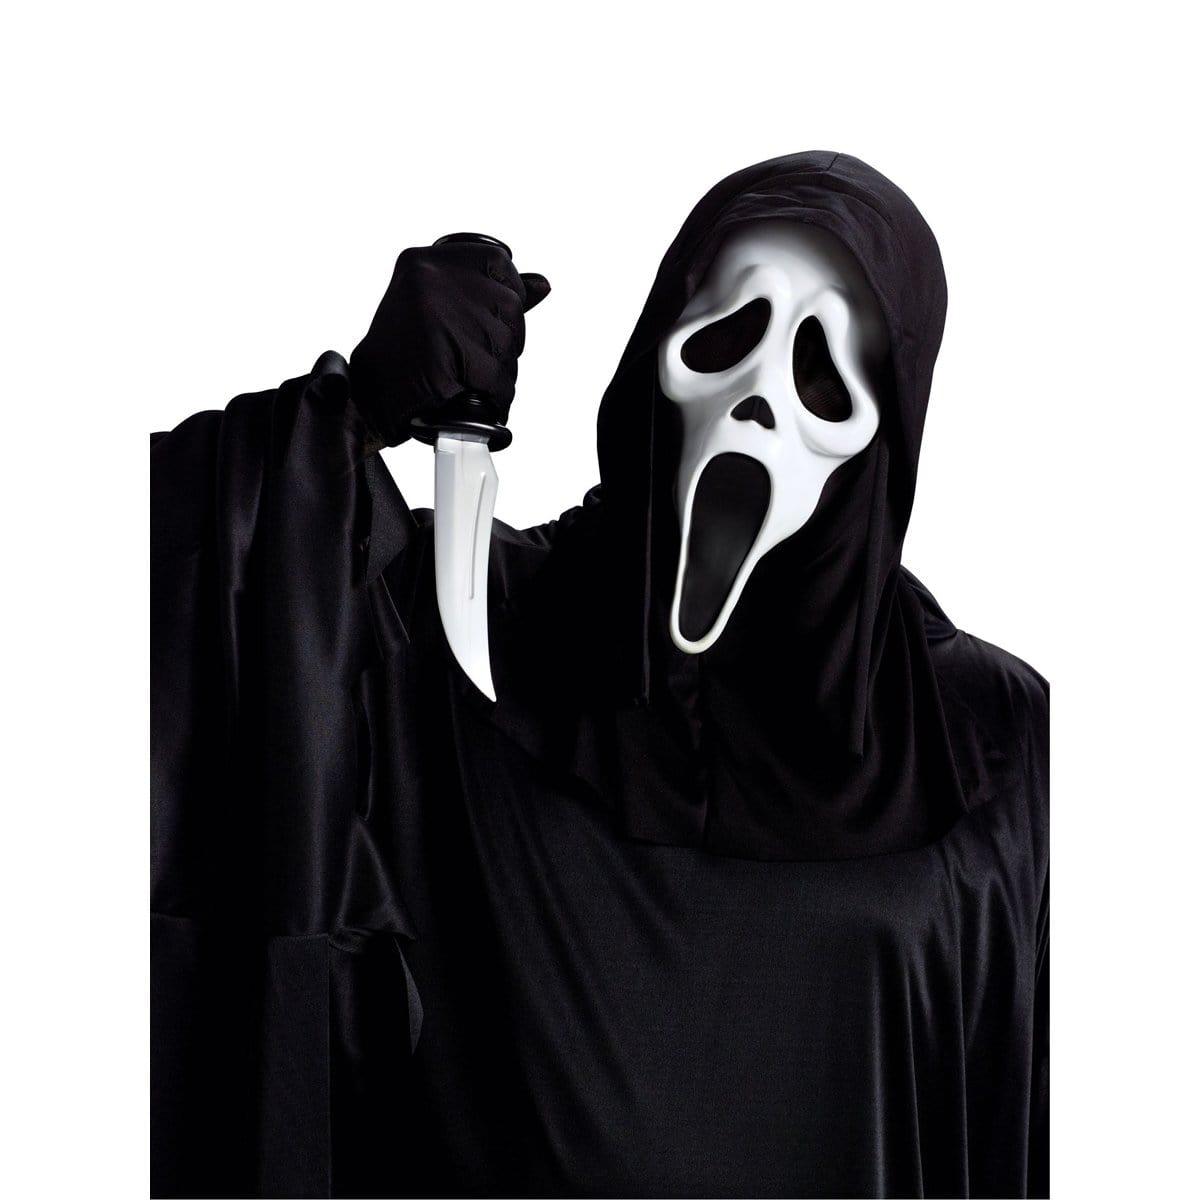 Buy Costume Accessories Ghostface accessory kit, Scream sold at Party Expert